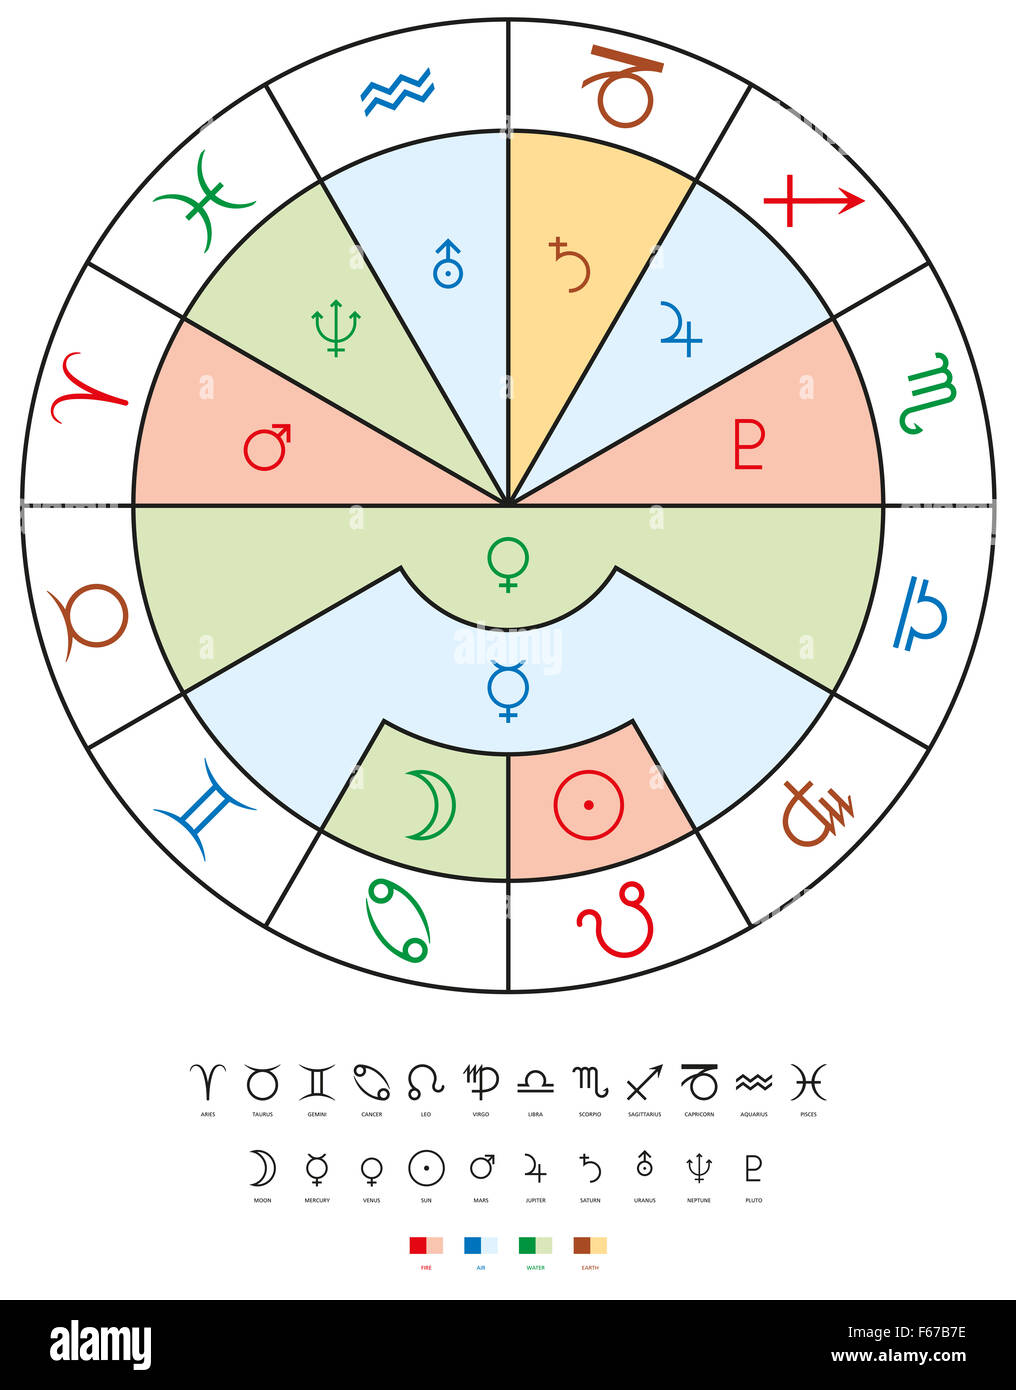 Zodiac Signs, Planets and Elements. Twelve signs of the zodiac with the ten planets and their related four elements. Stock Photo